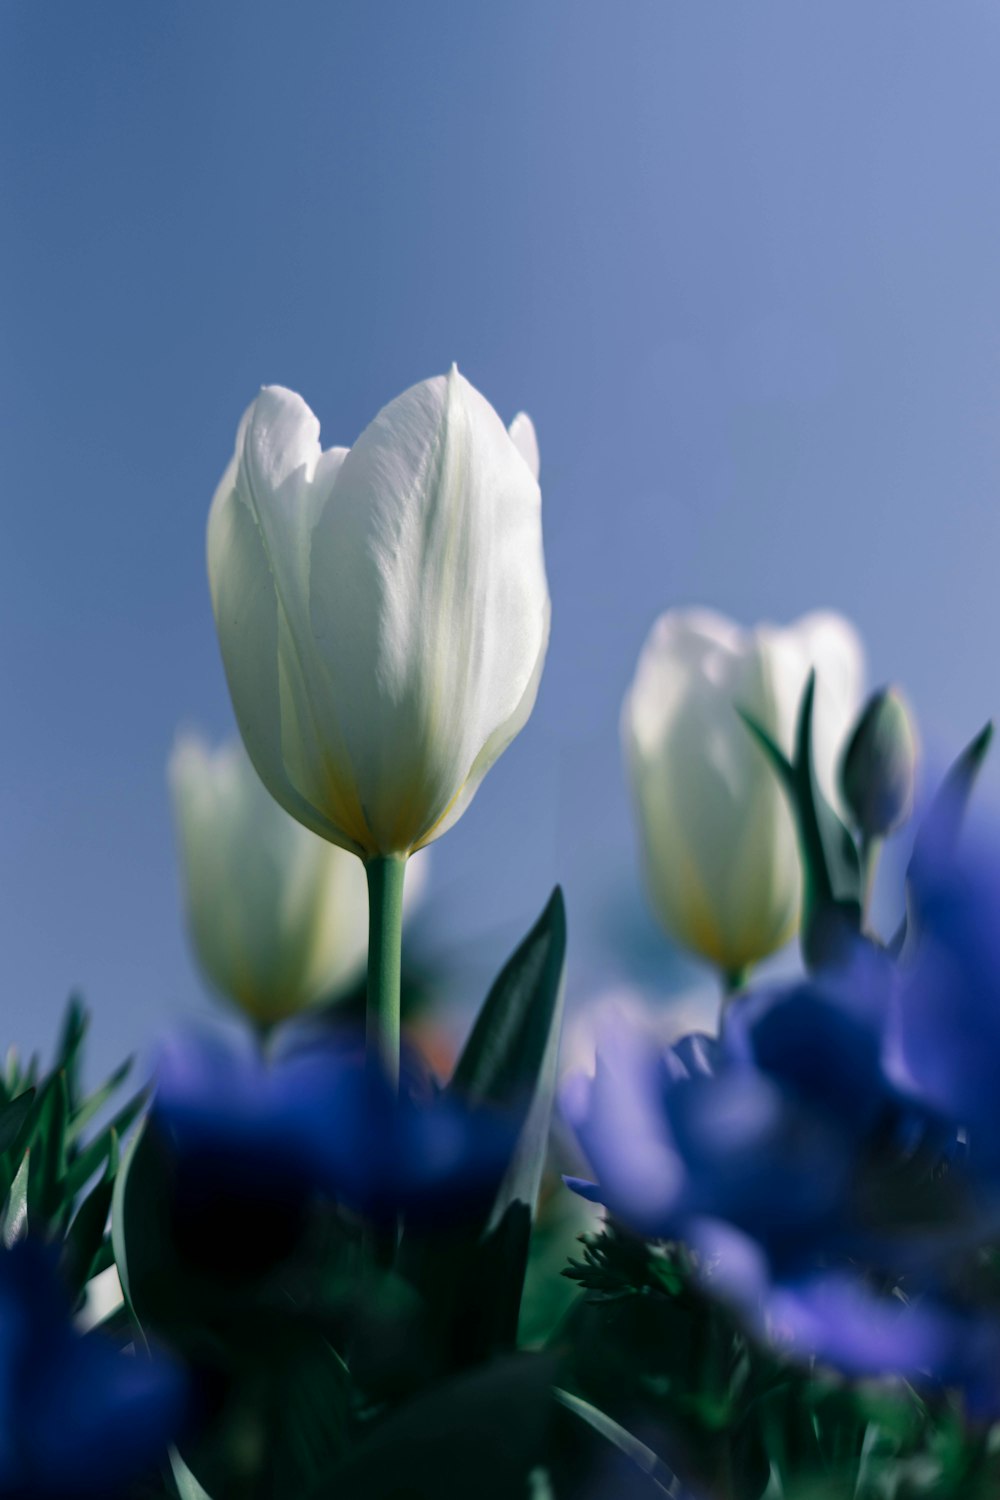 white tulip flowers in close-up photography